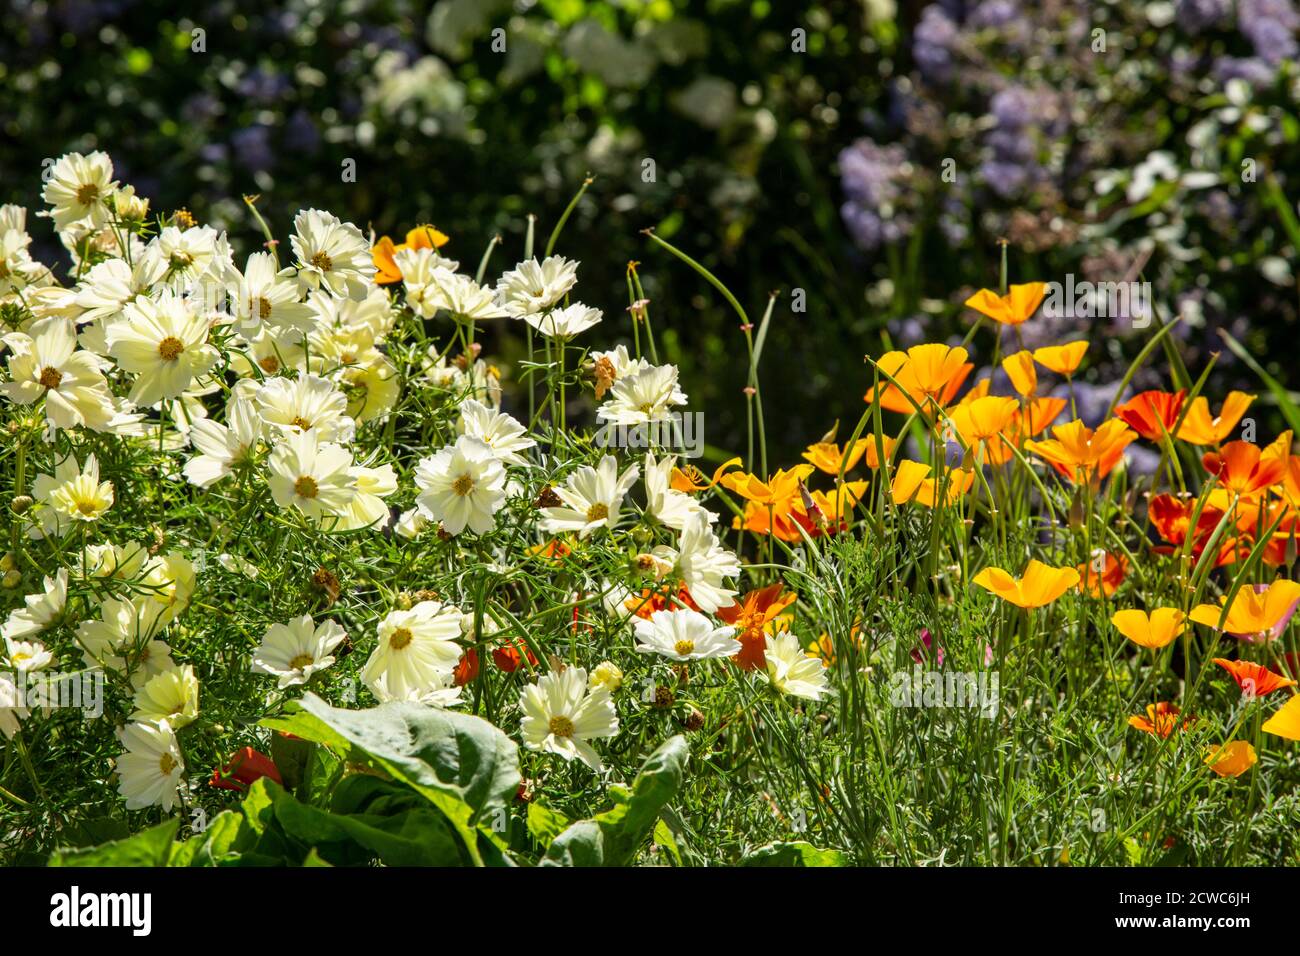 Cosmos bipinnatus 'Xanthos', cosmos xanthos, and orange California Poppy plants in containers and full flower. Stock Photo